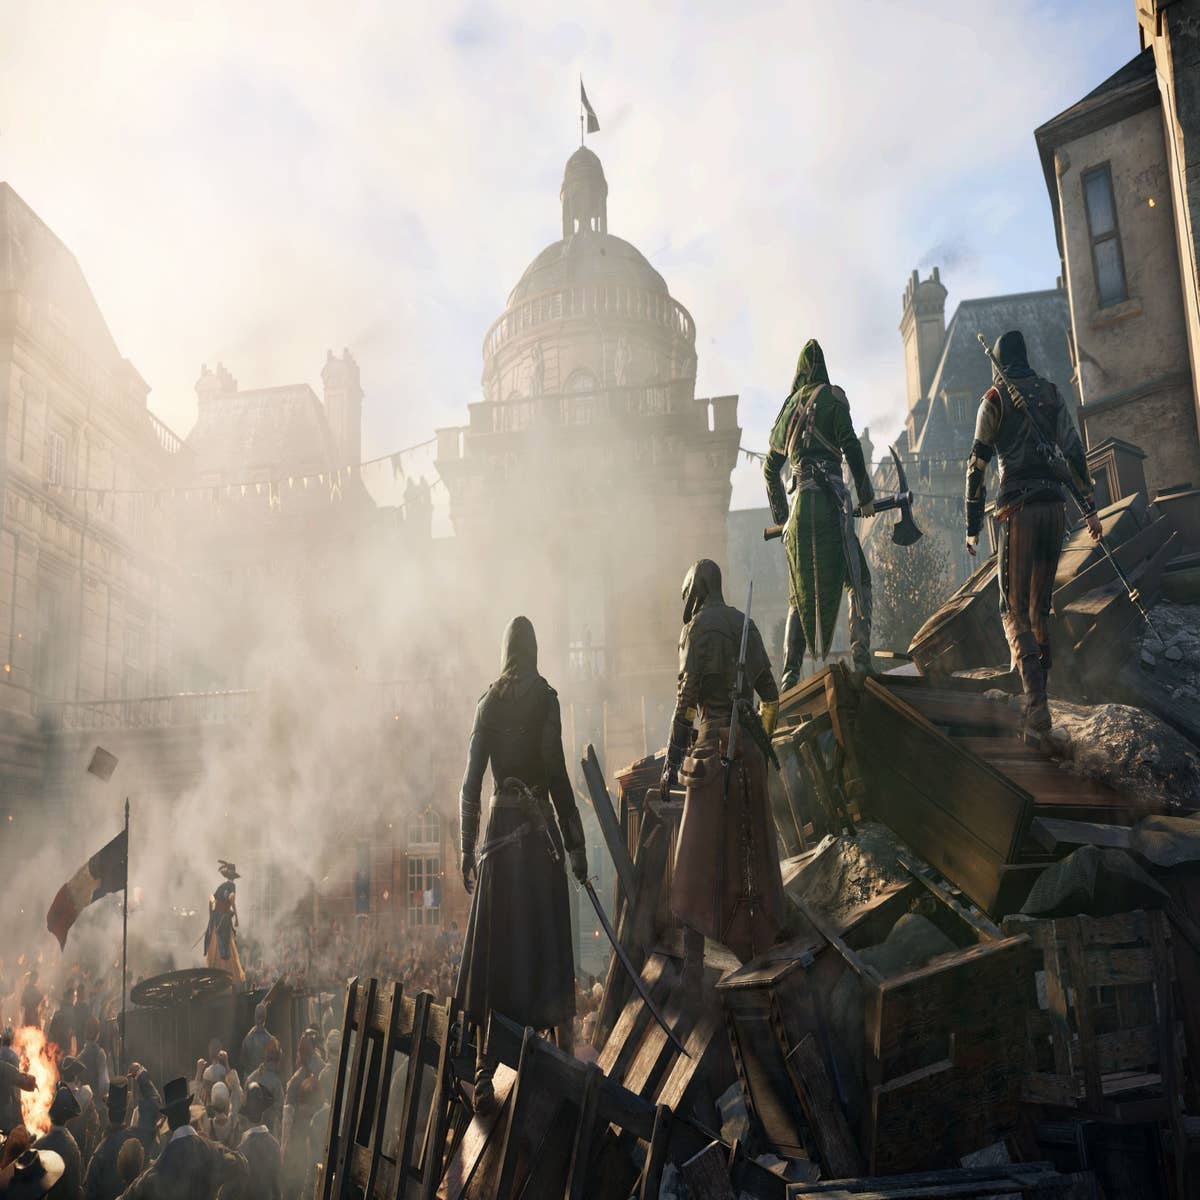 Assassin's Creed Unity: Co-Op Gameplay Trailer